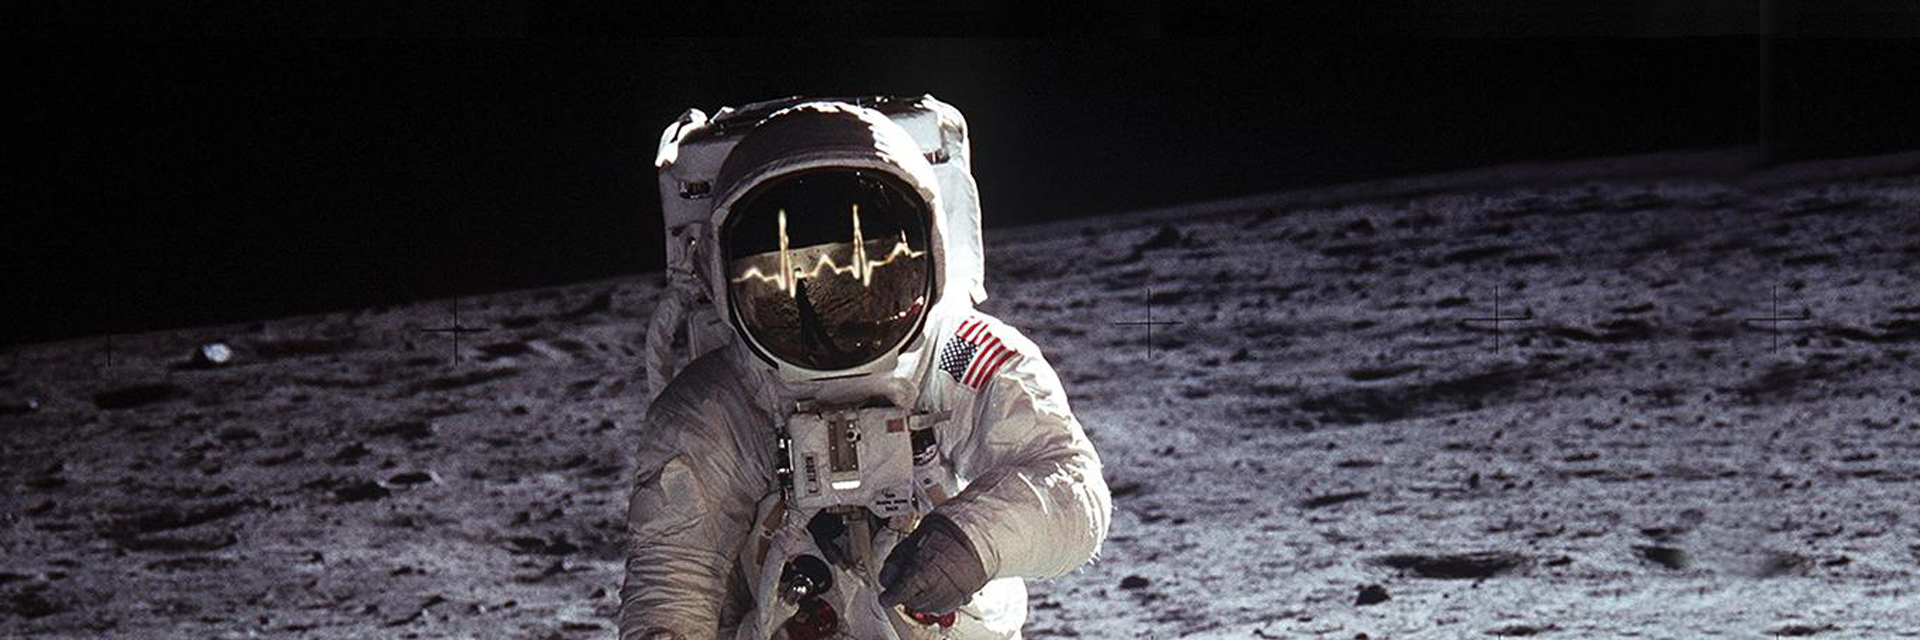 Man walking on the moon in space suit